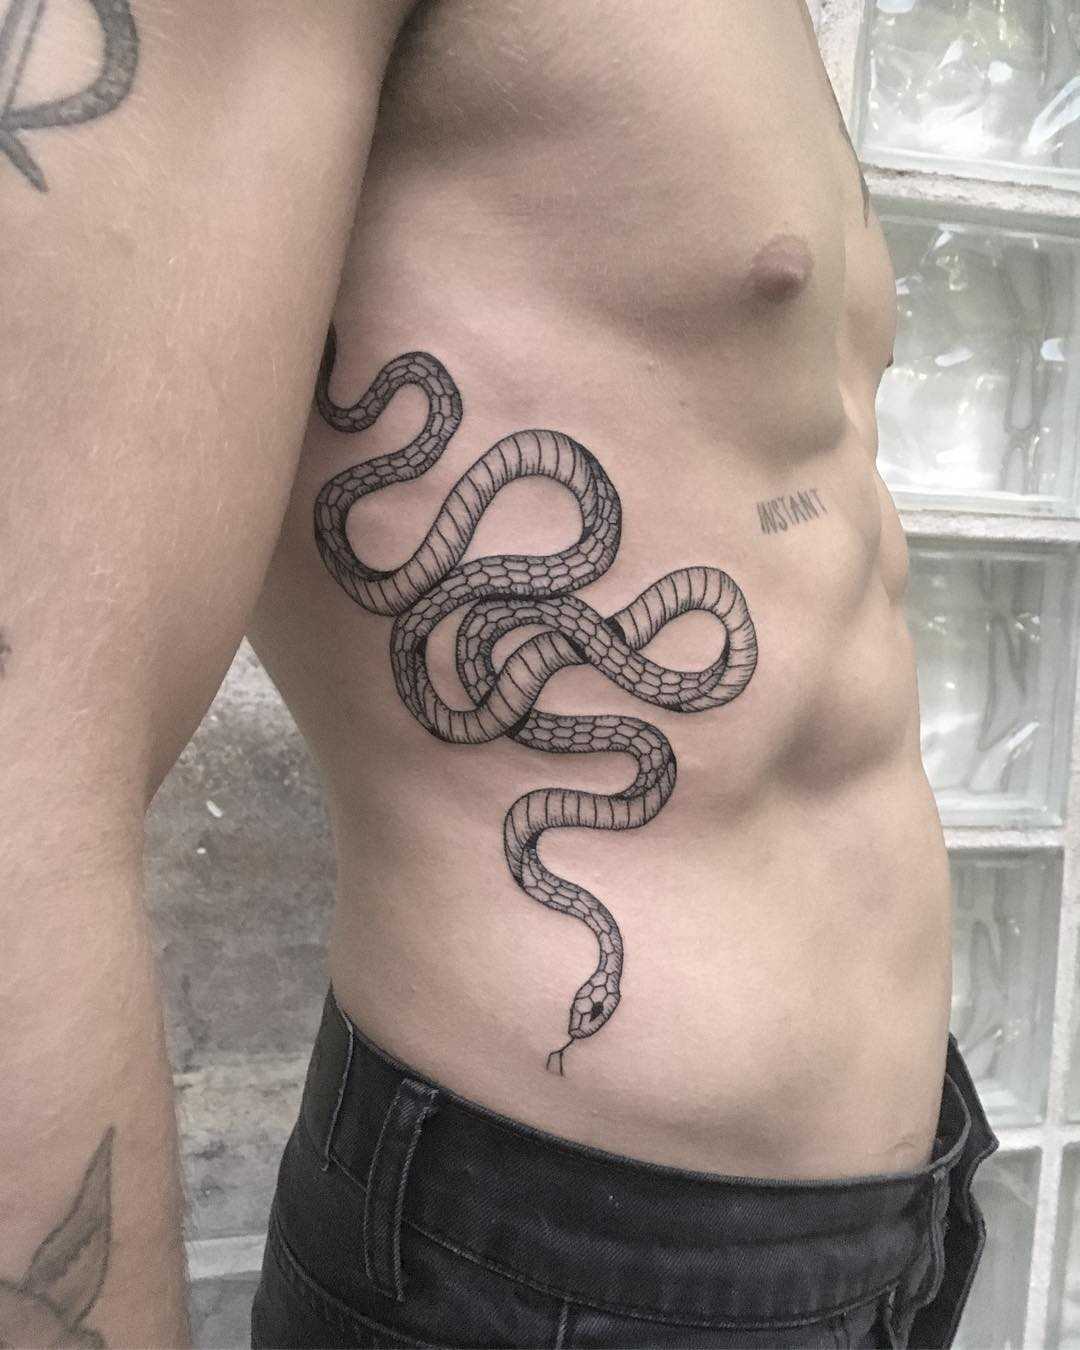 Large snake tattoo on the side